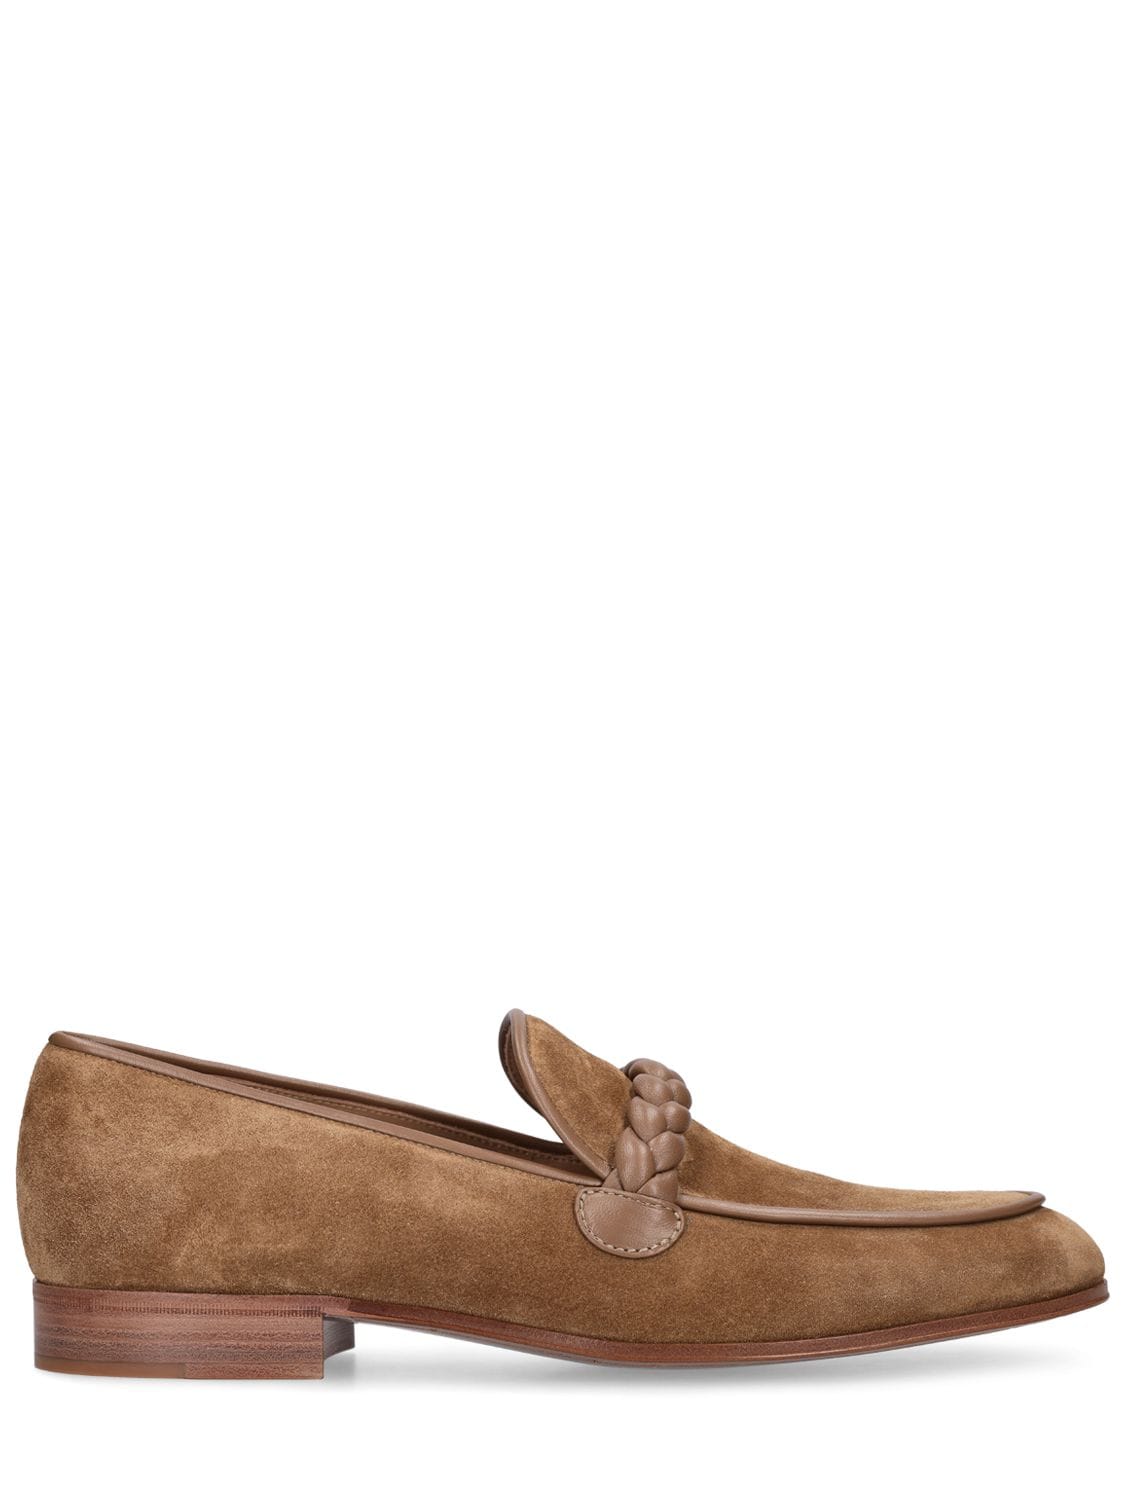 GIANVITO ROSSI MASSIMO SUEDE & LEATHER LOAFERS